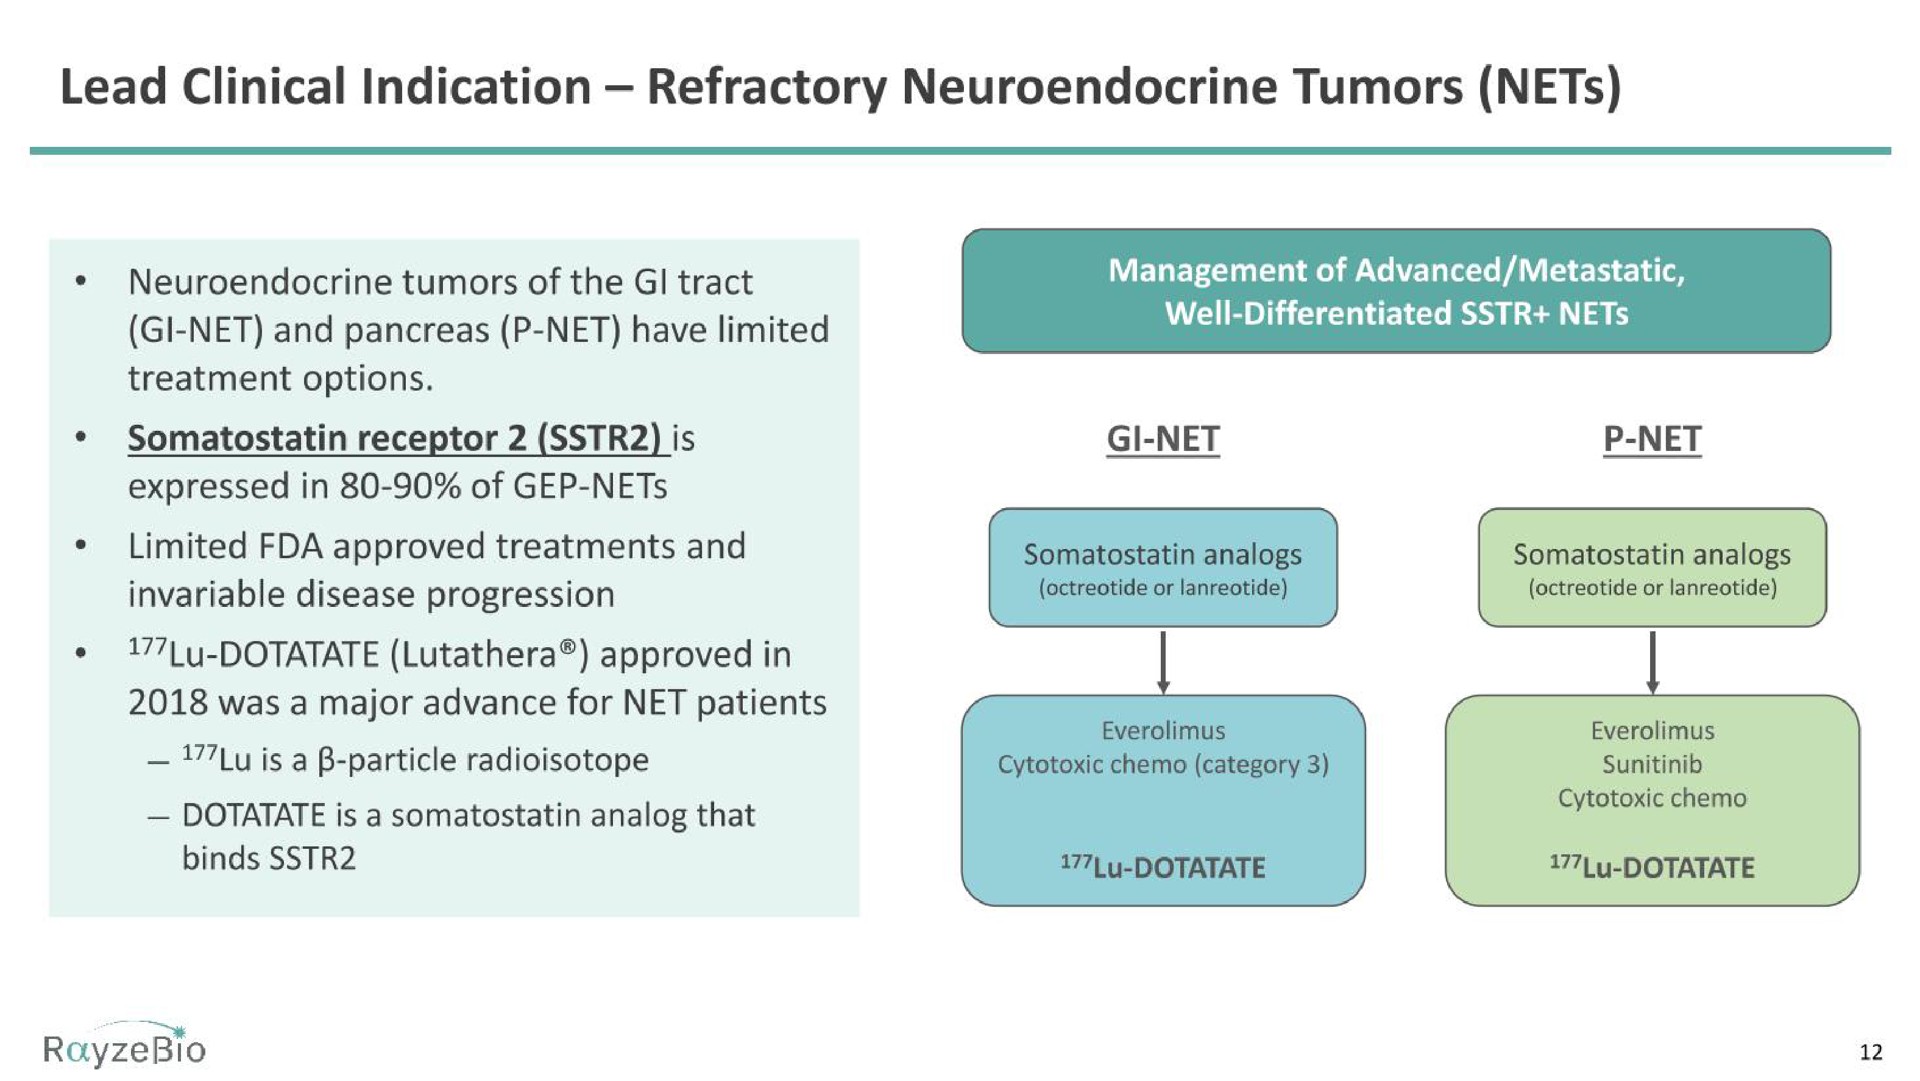 lead clinical indication refractory tumors nets tumors of the tract net and pancreas net have limited als gses | RayzeBio